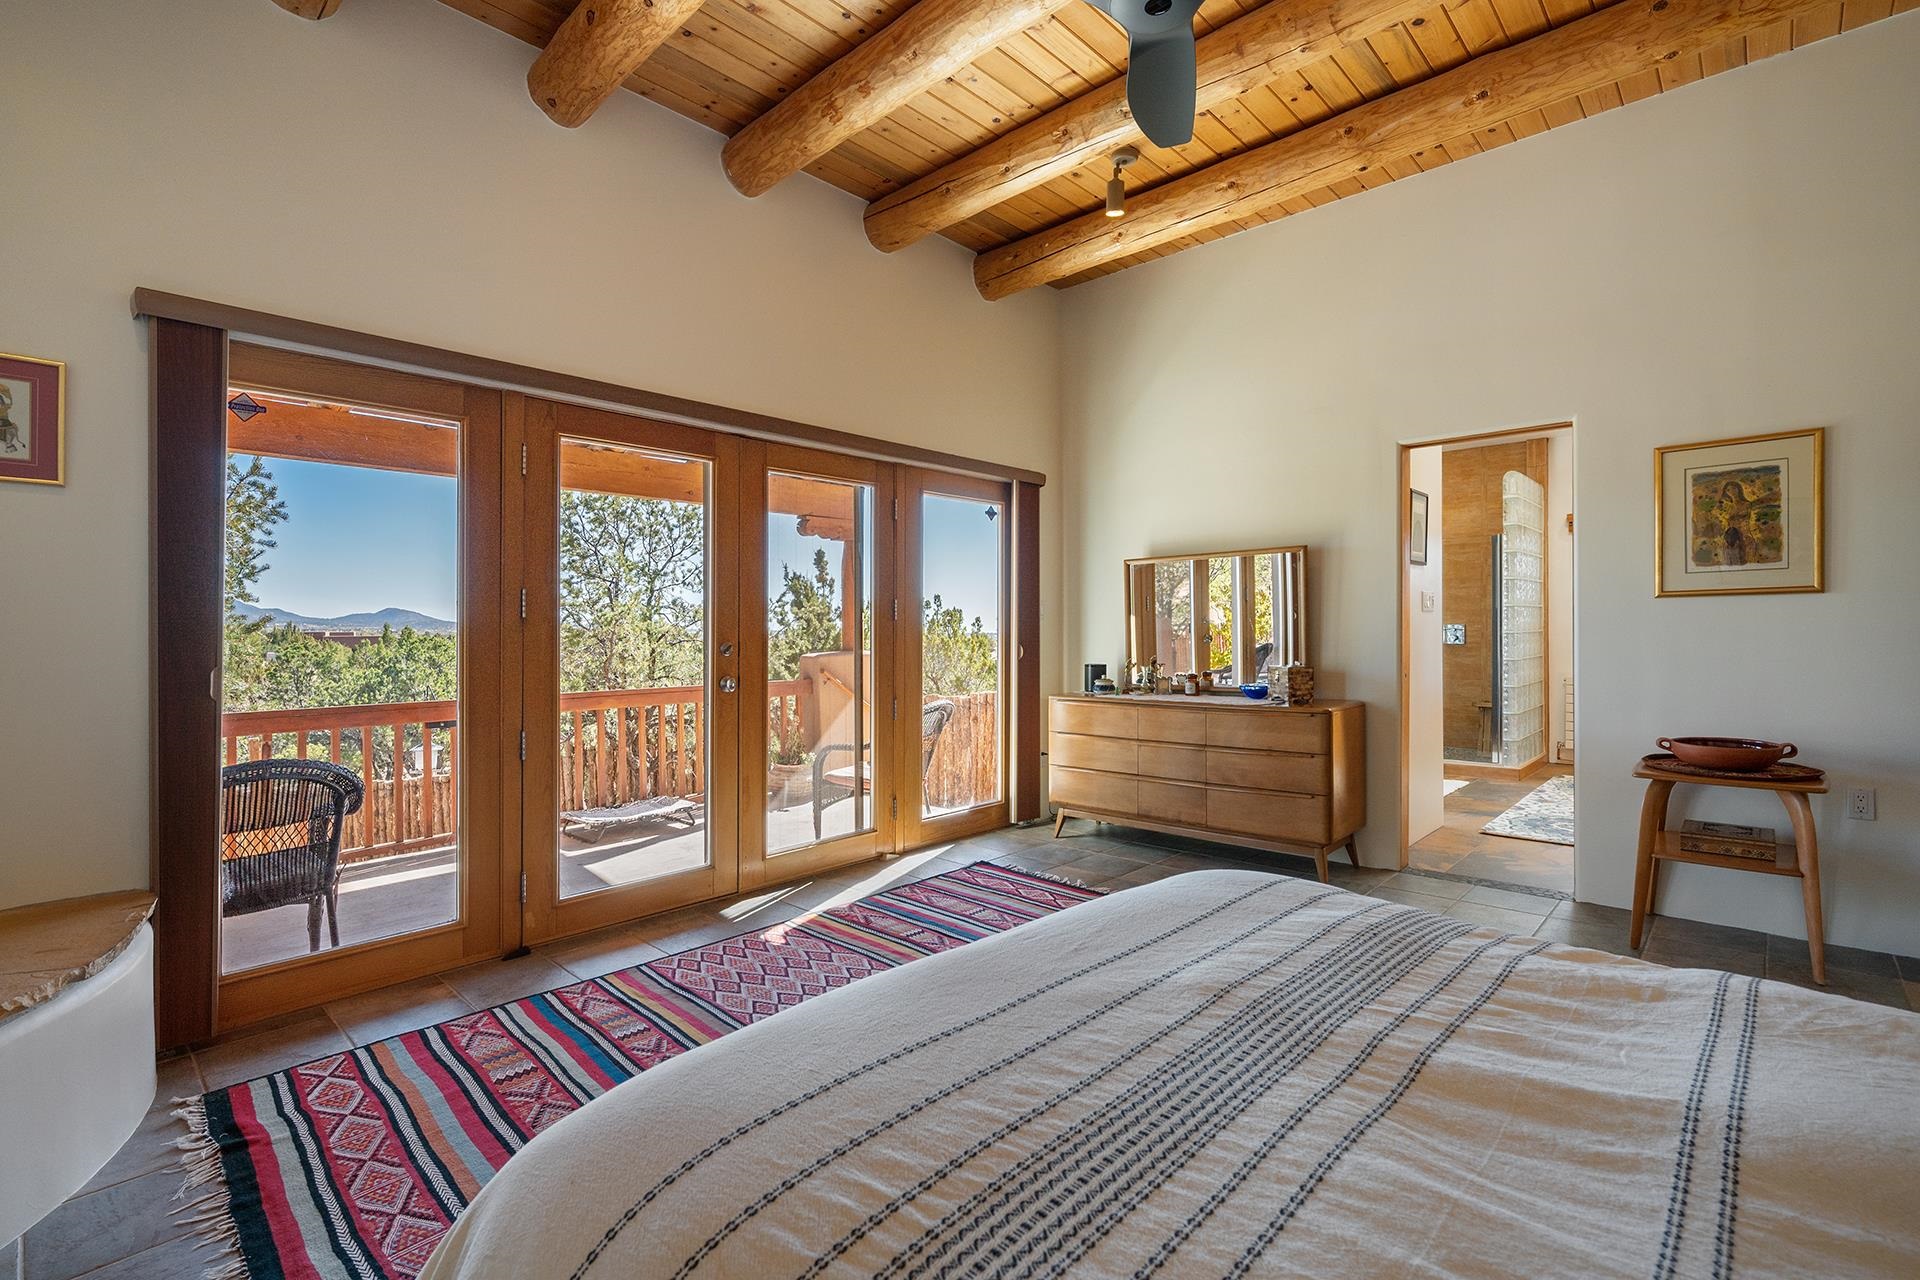 1702 Watchpoint, Santa Fe, New Mexico 87507, 3 Bedrooms Bedrooms, ,3 BathroomsBathrooms,Residential,For Sale,1702 Watchpoint,202200821